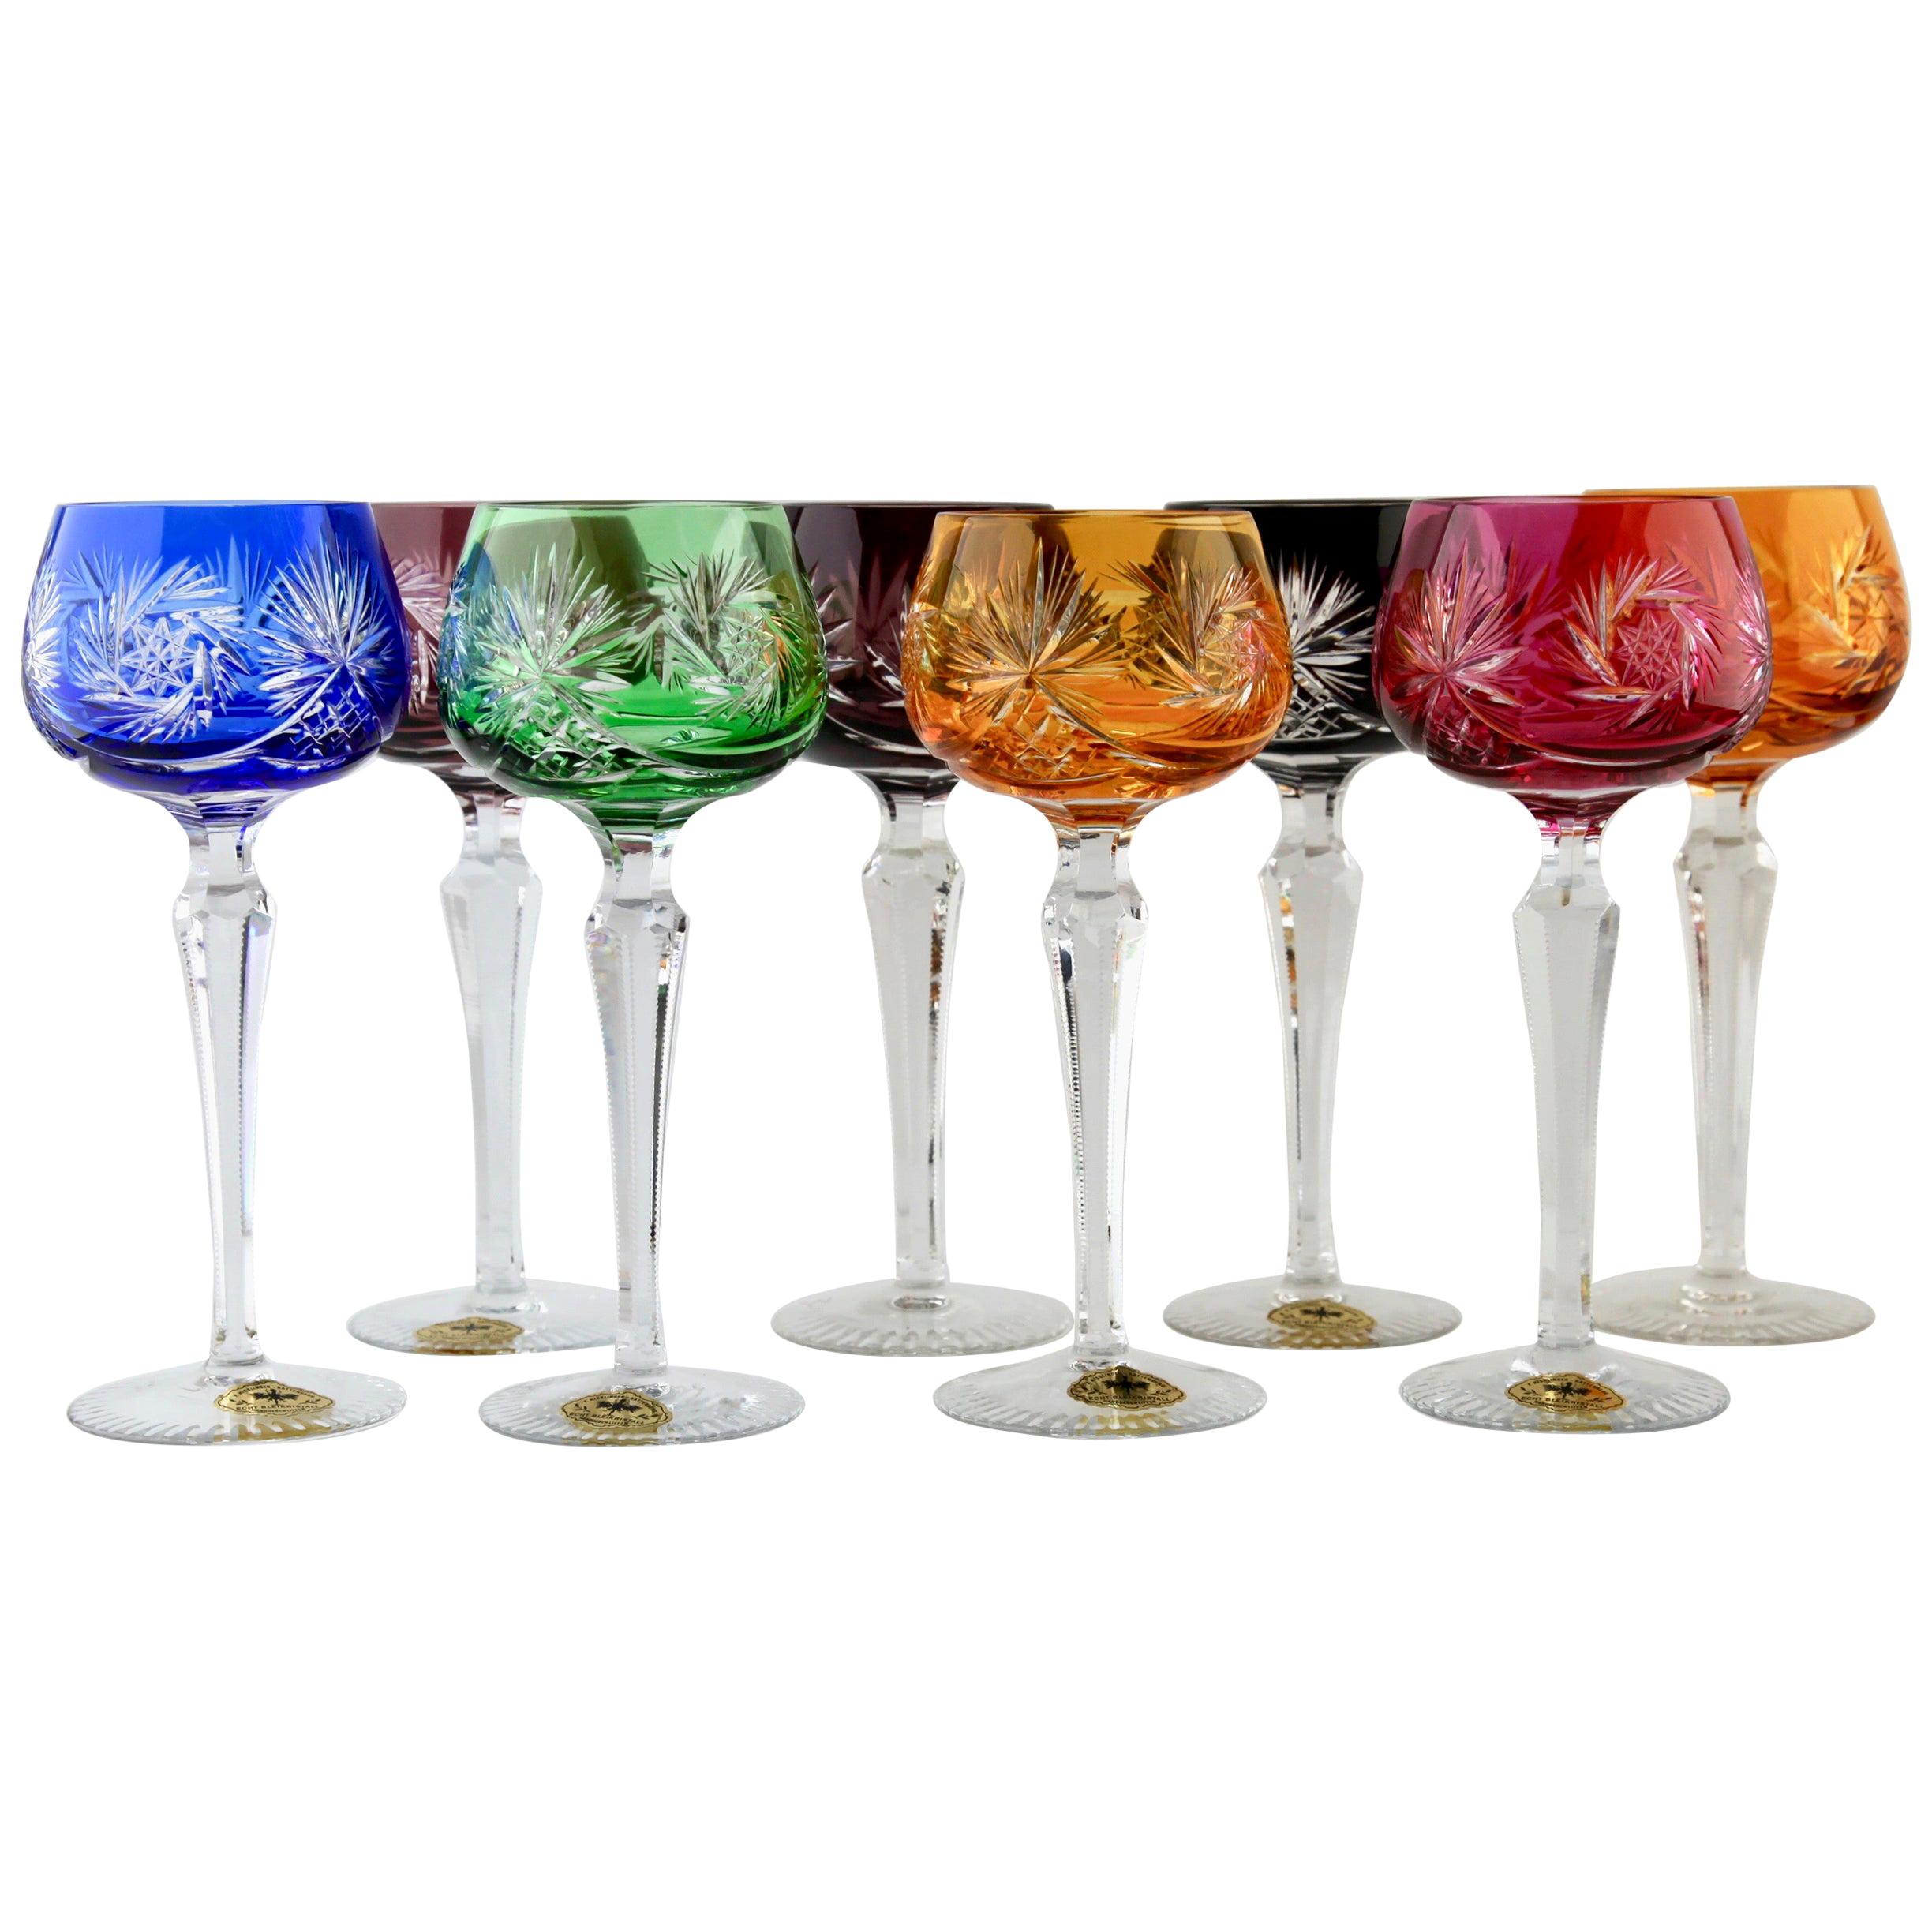 Crystal Mix Set of 8 F.Kisslinger Stem Glasses with Colored Overlay Cut to Clear